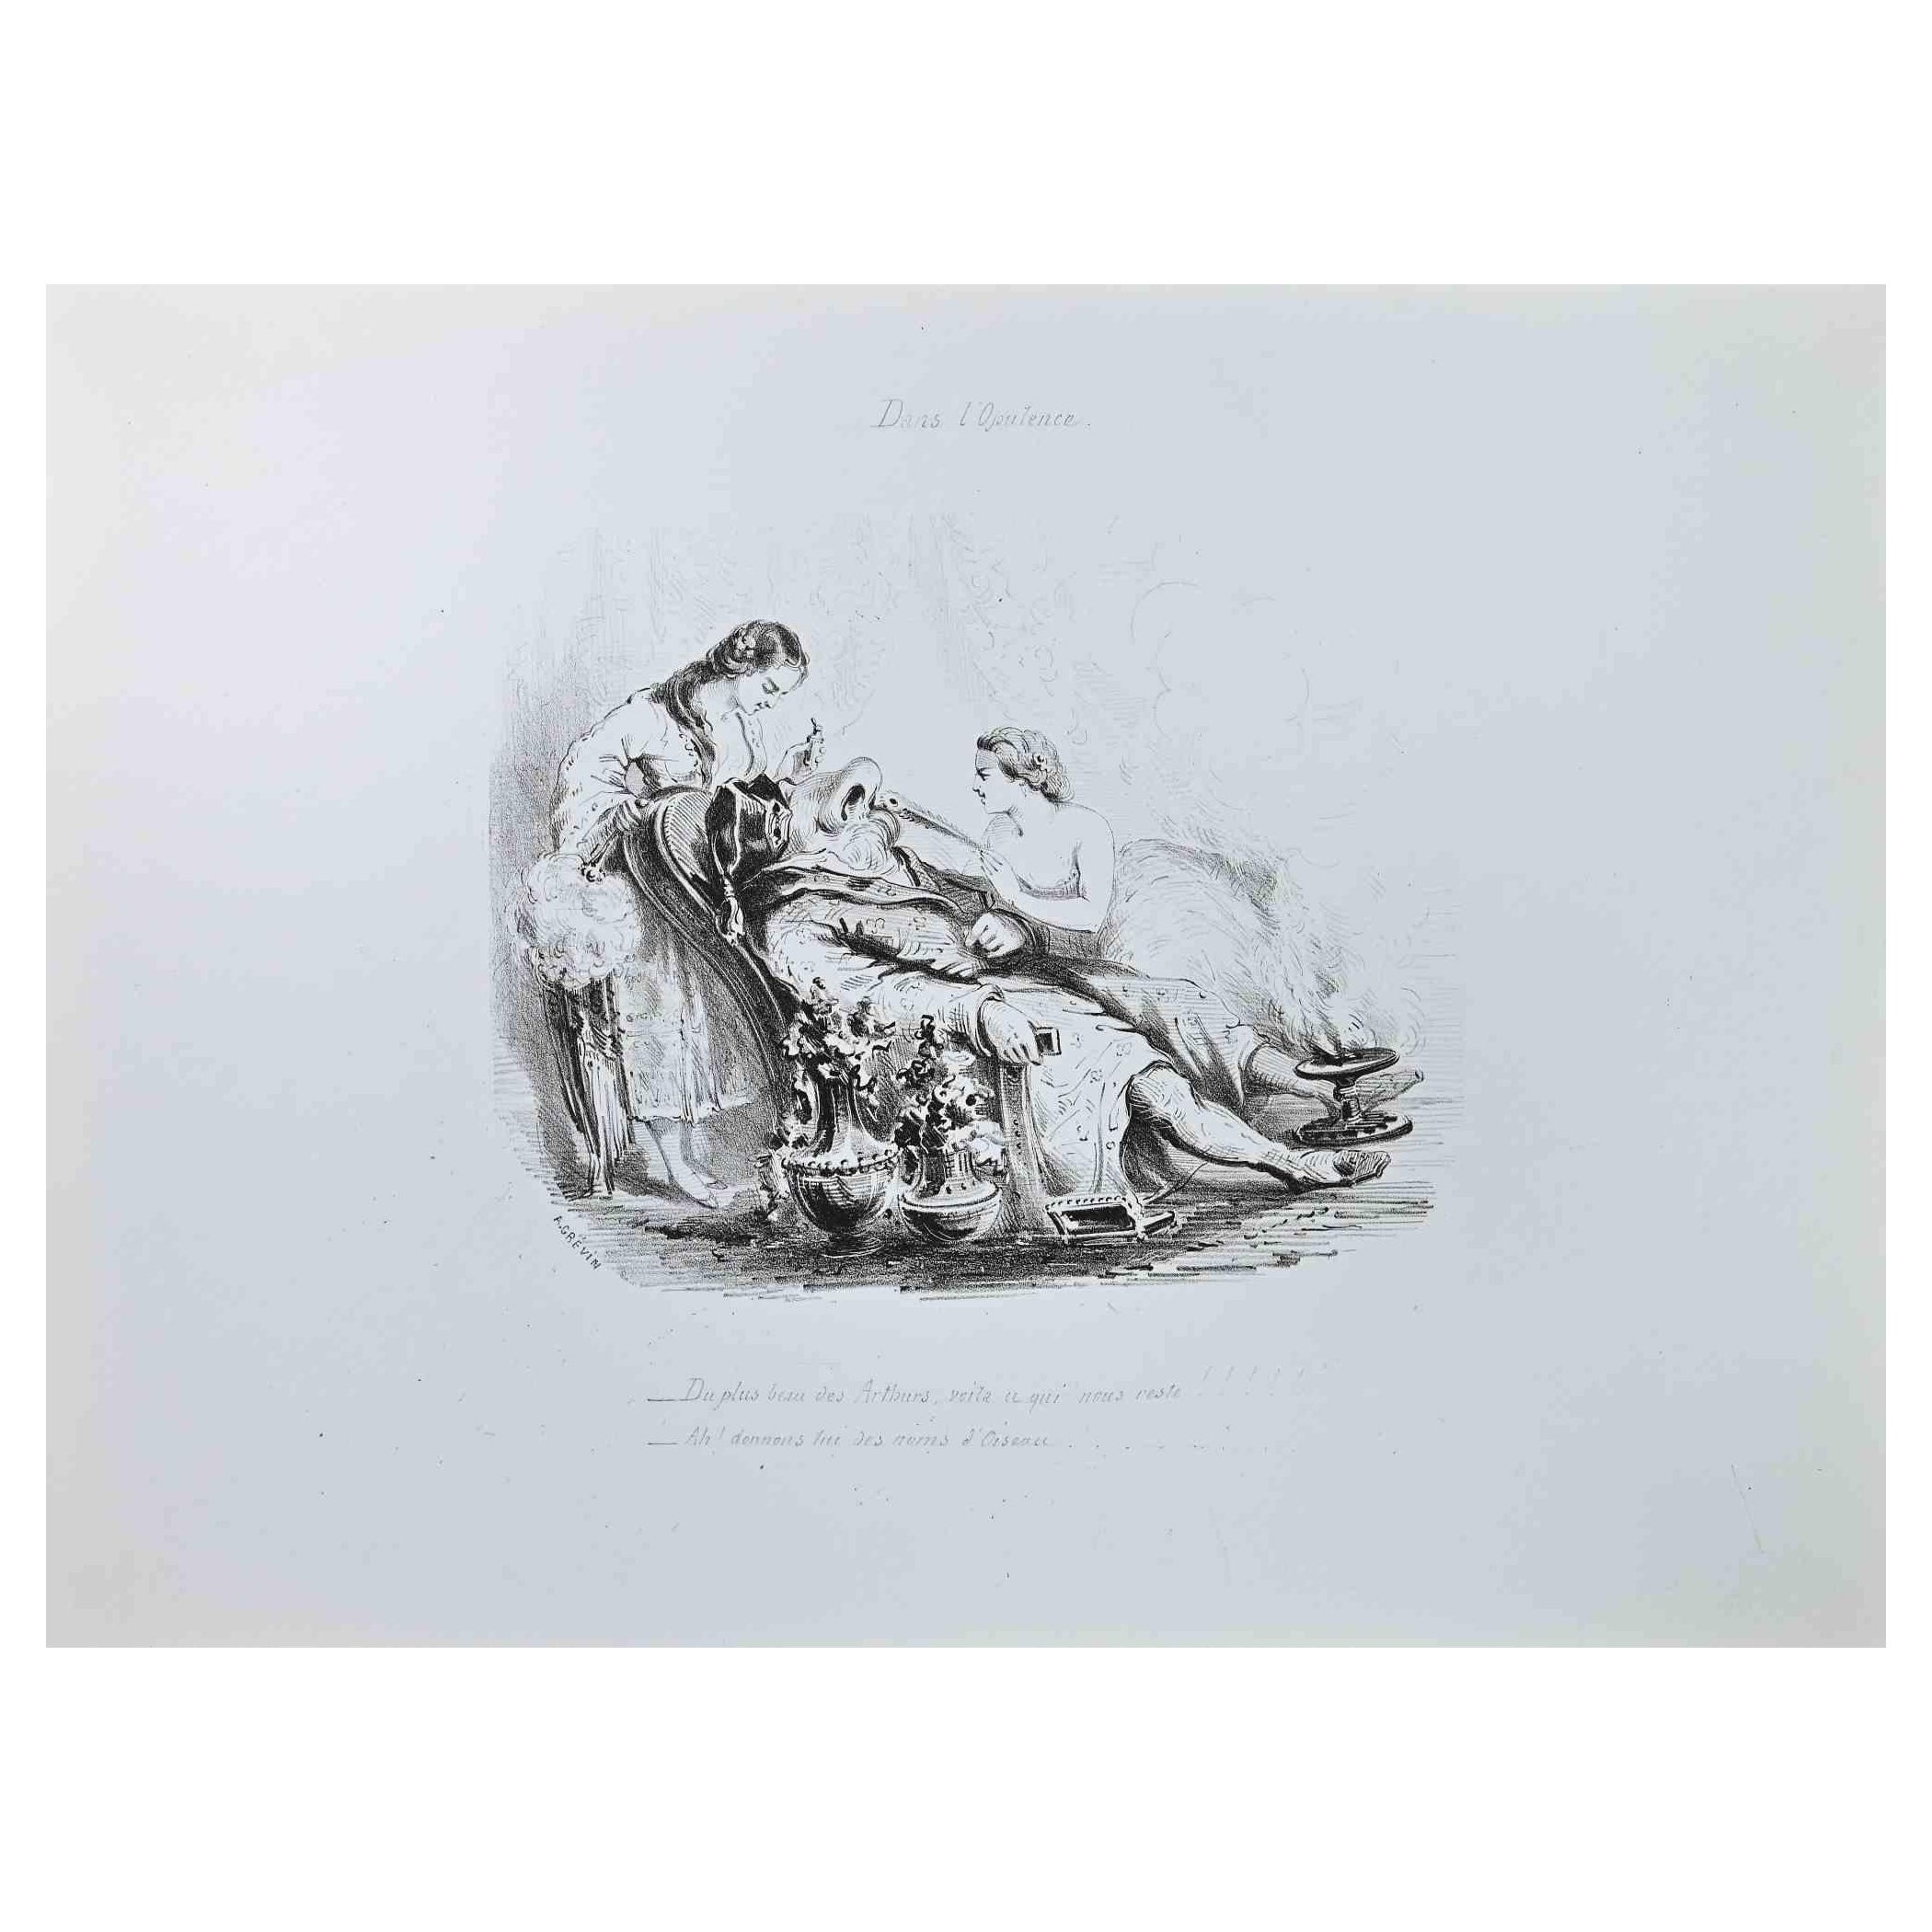 Alfred Grevin Figurative Print - Dans l'Opulence - Lithograph by Alfred Grévin - Late 19th century